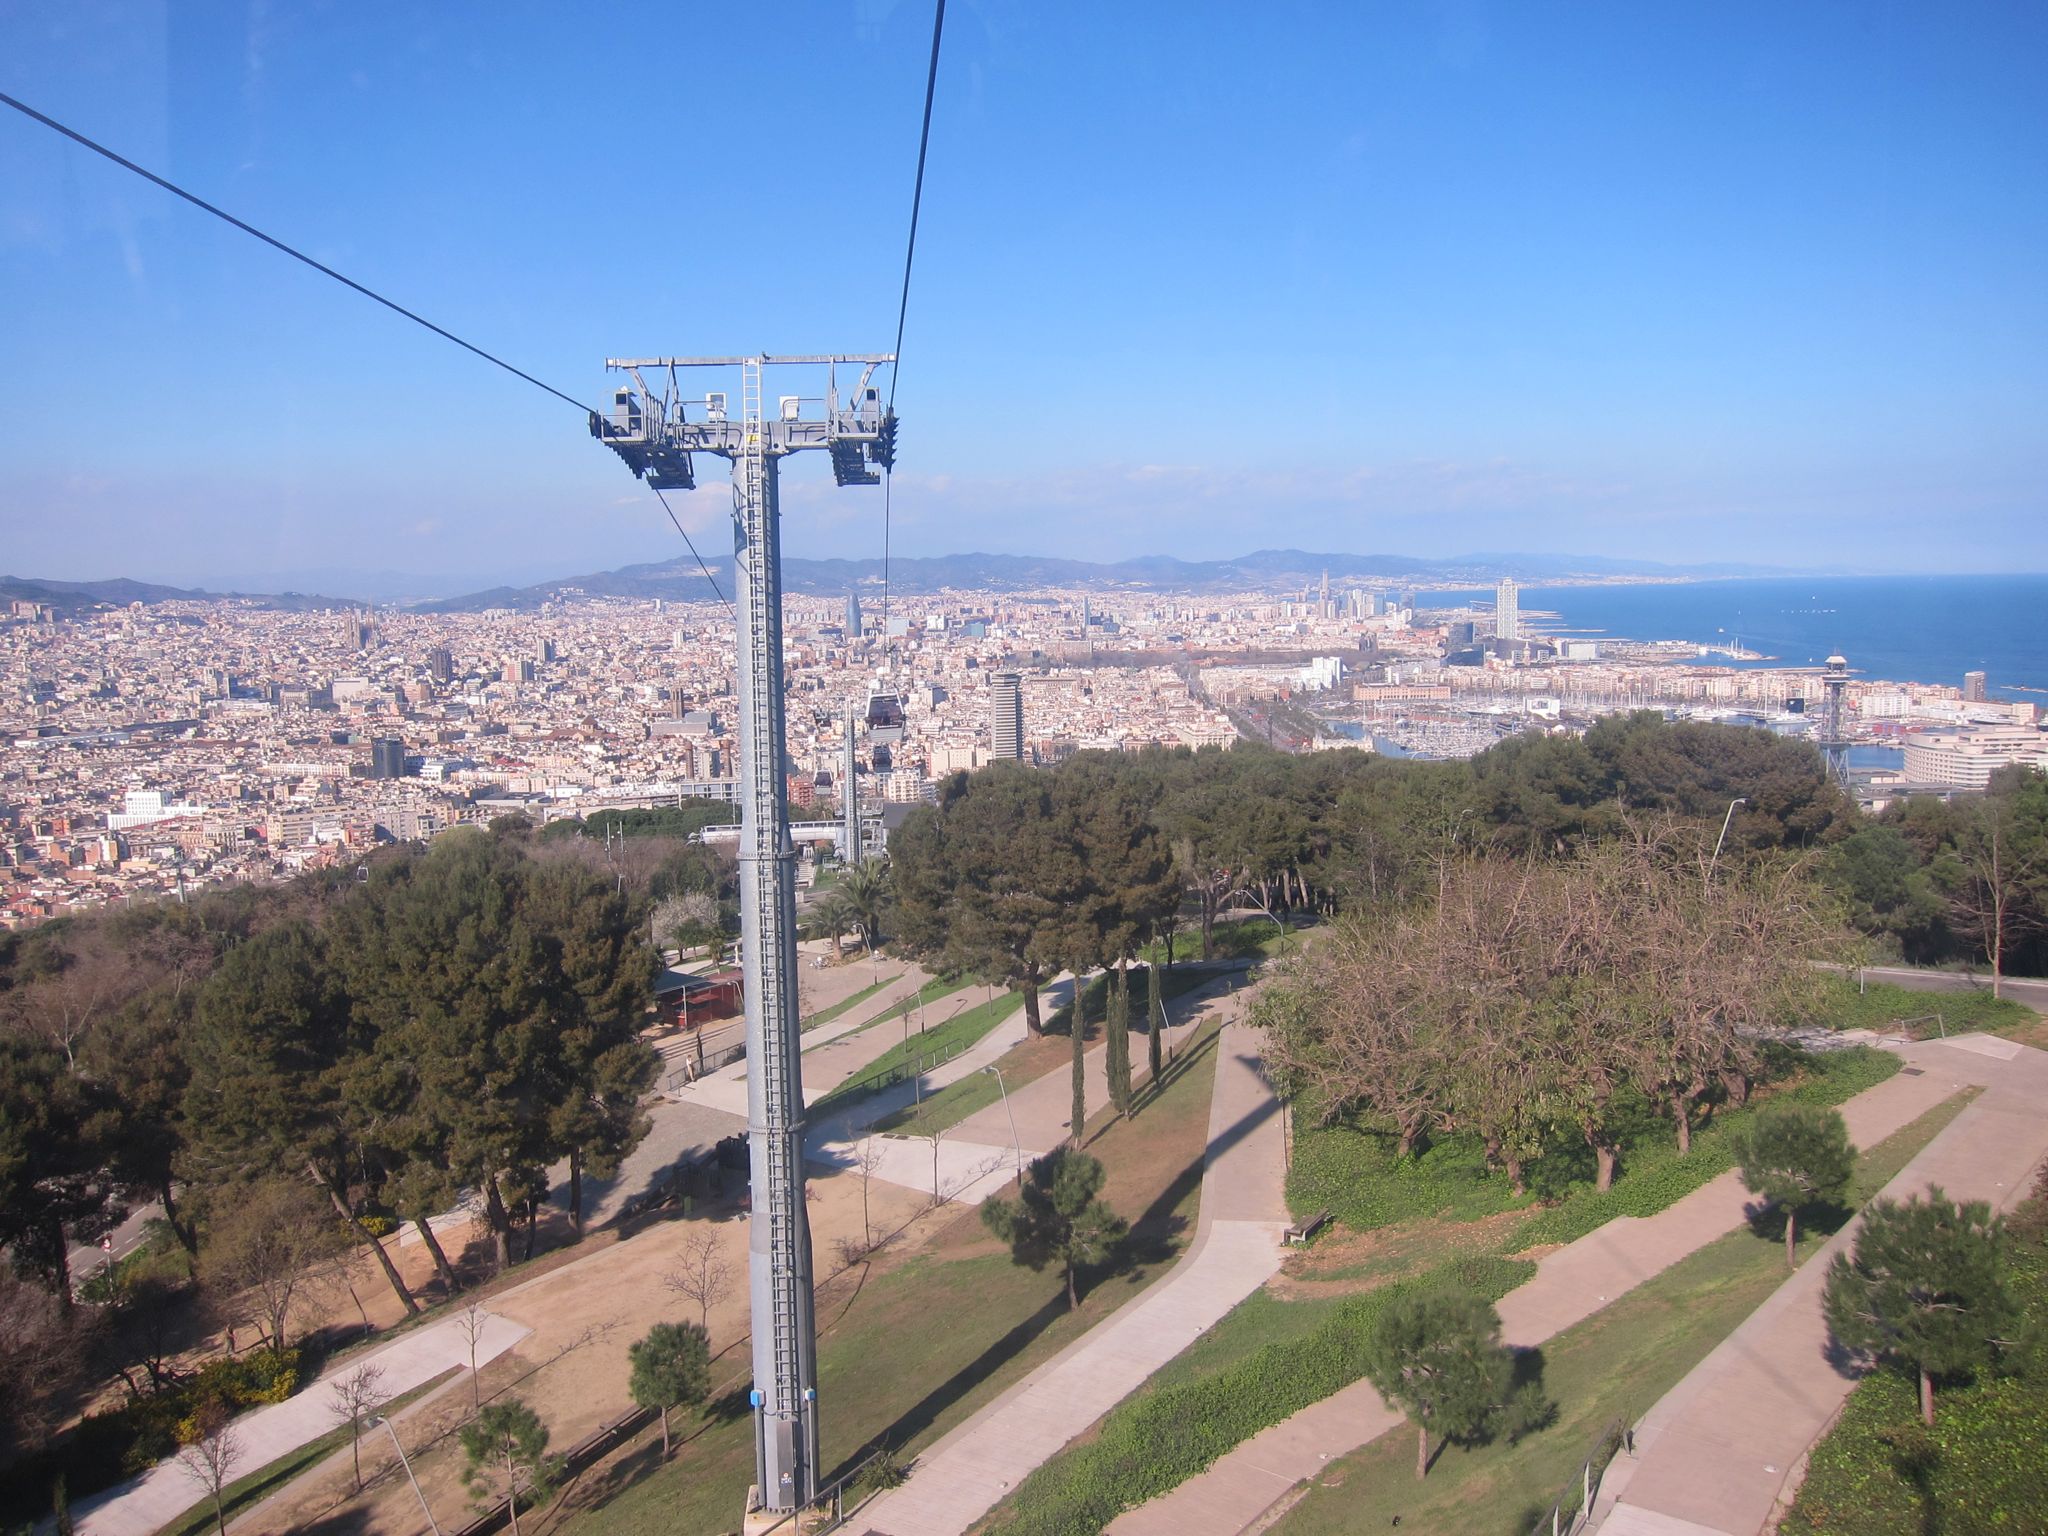 Photo 44 of 102 from the album Highlights Barcelona 2011.